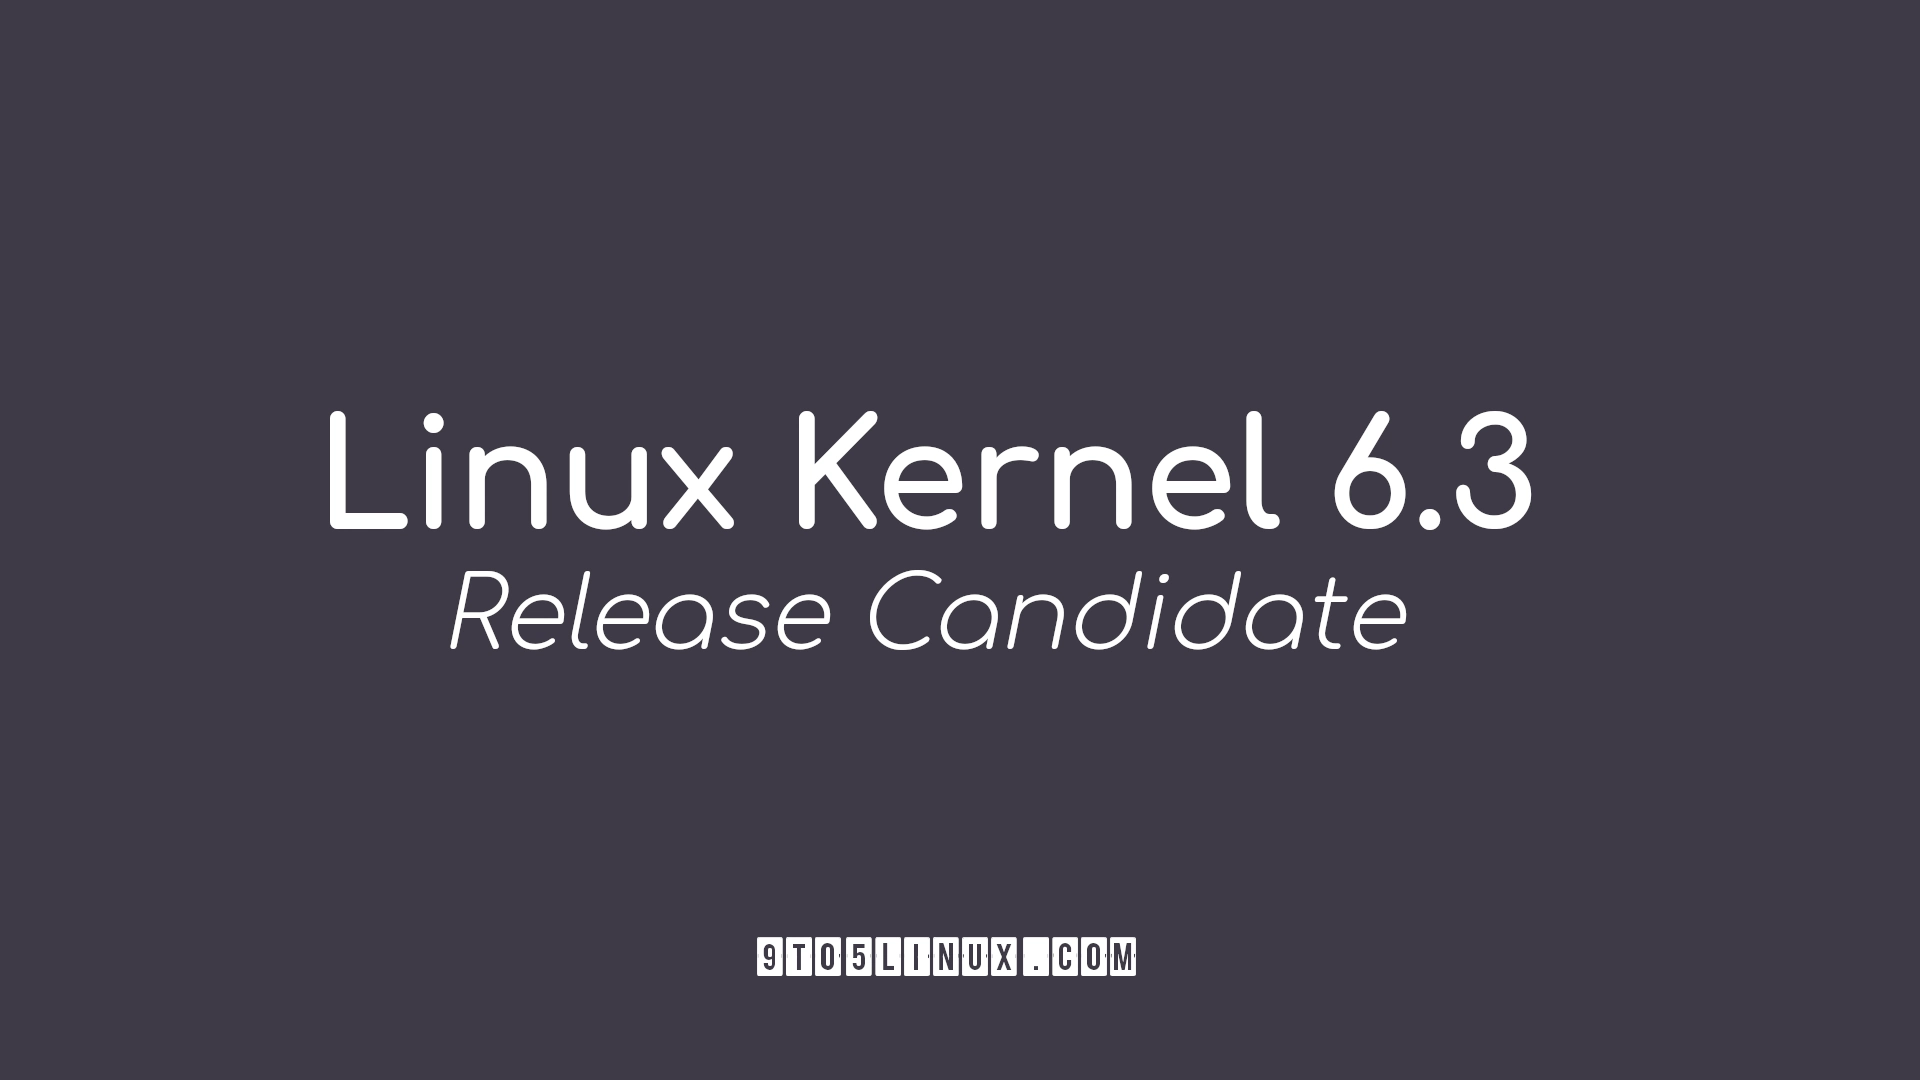 Linus Torvalds Announces First Linux Kernel 6.3 Release Candidate